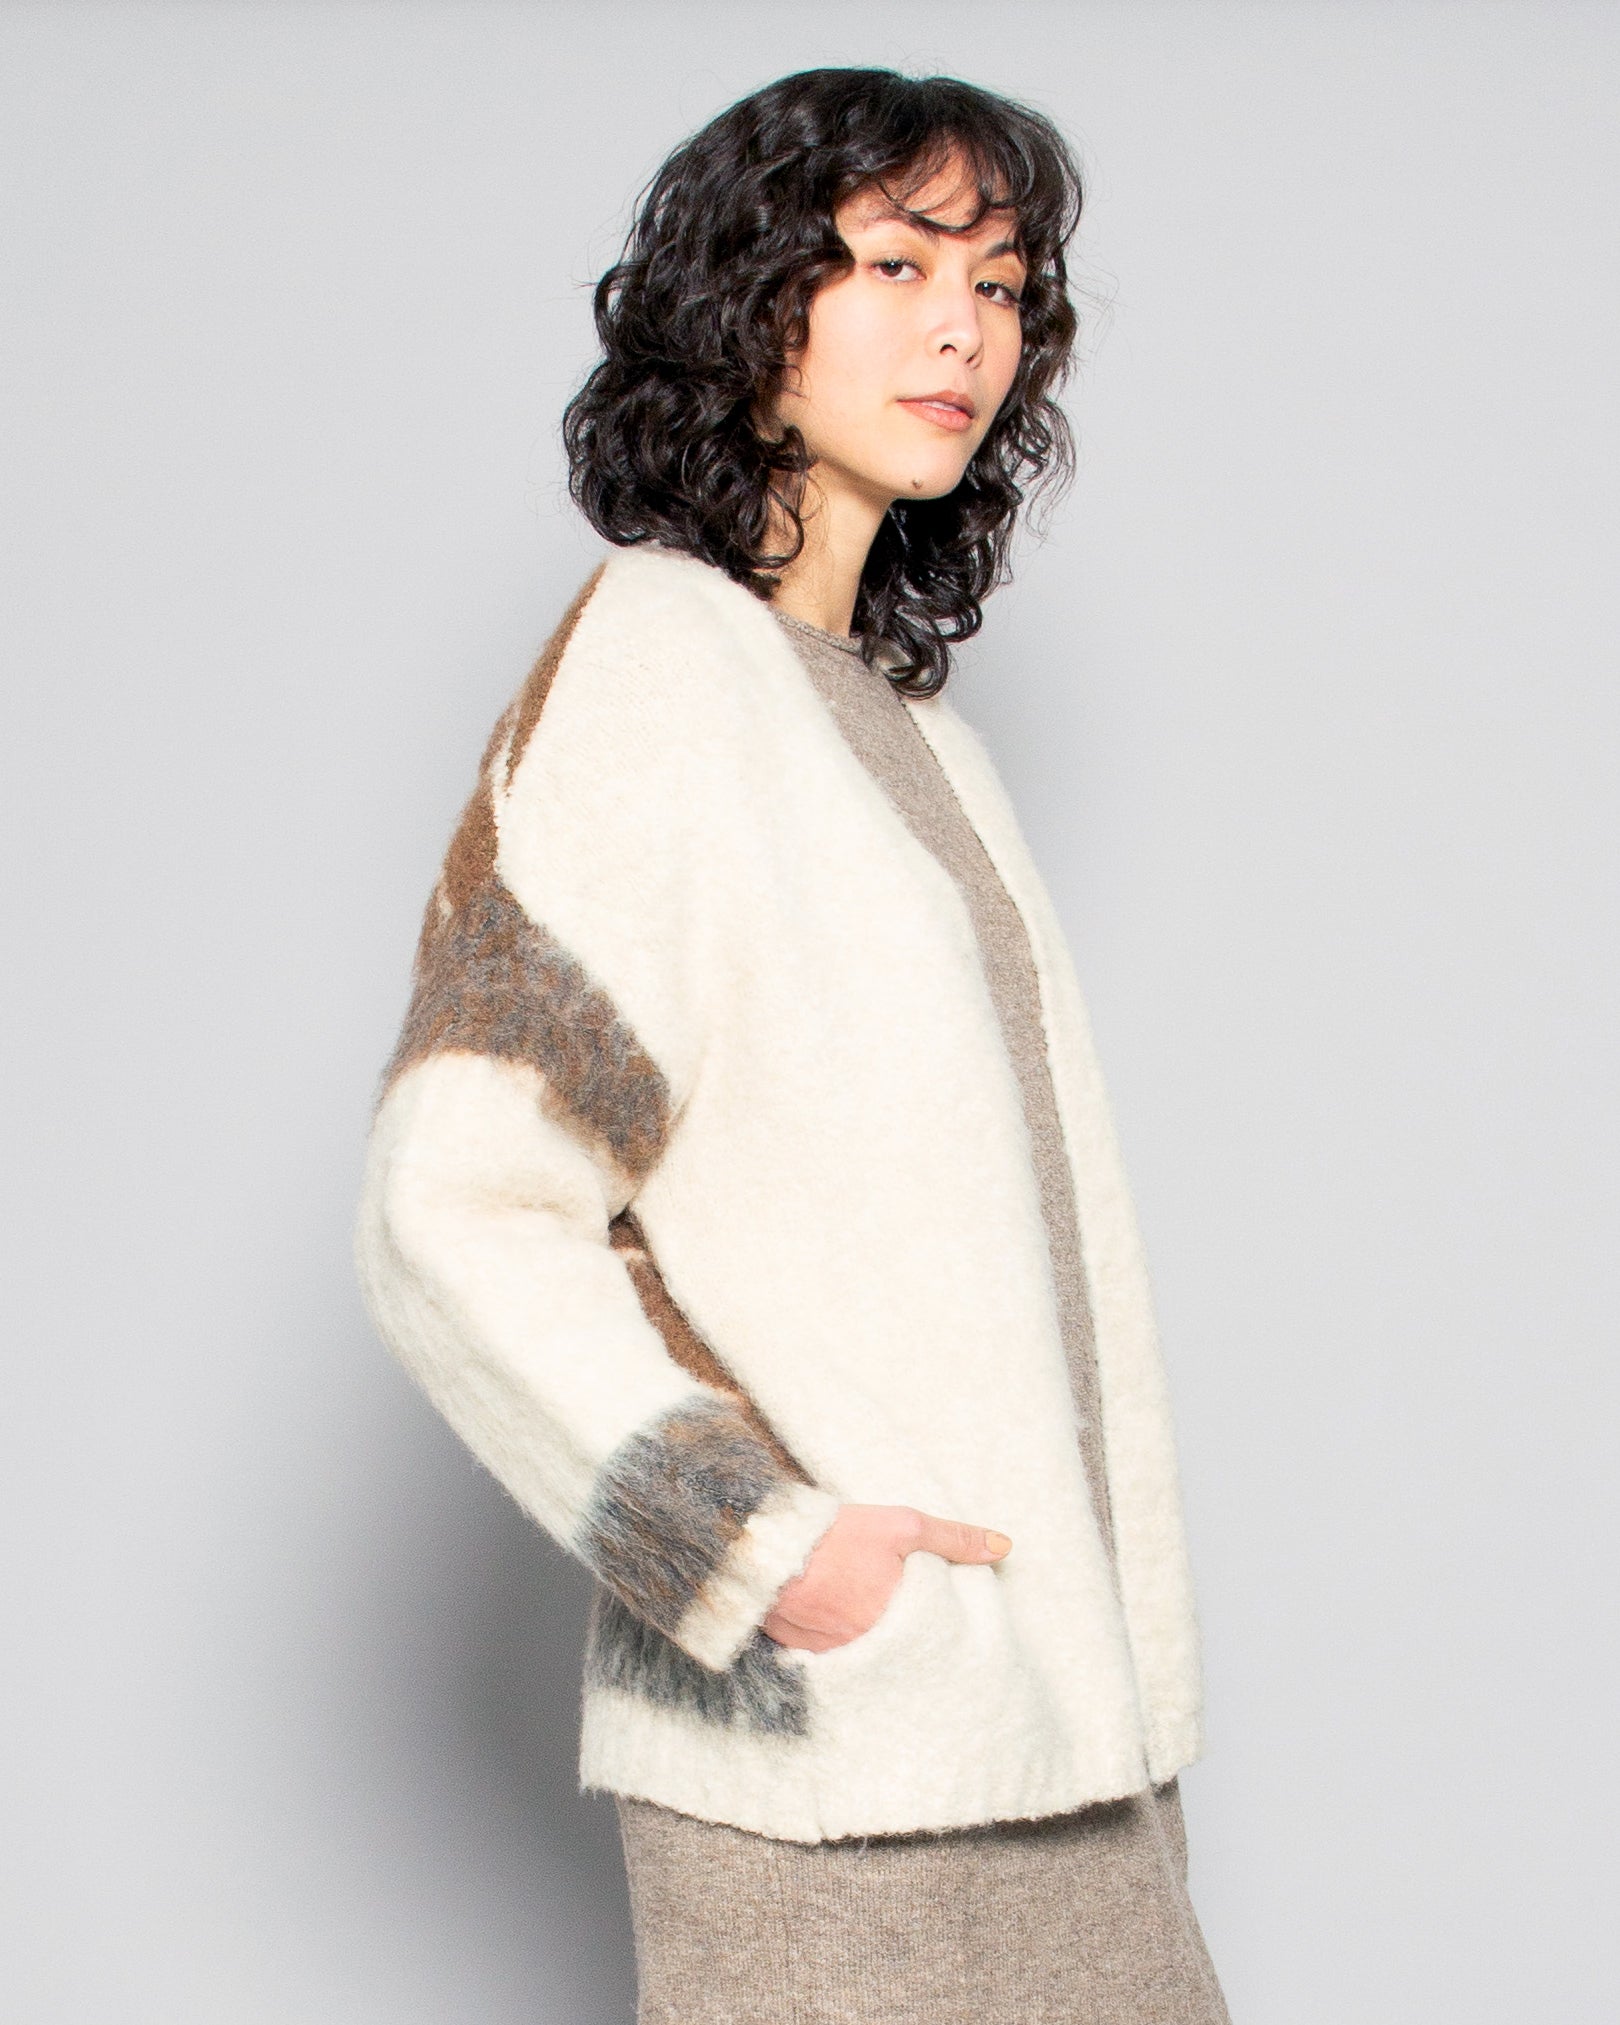 PERSONS Roan Felted Wool Blend Cardi in Ecru Multi available at Lahn.shop